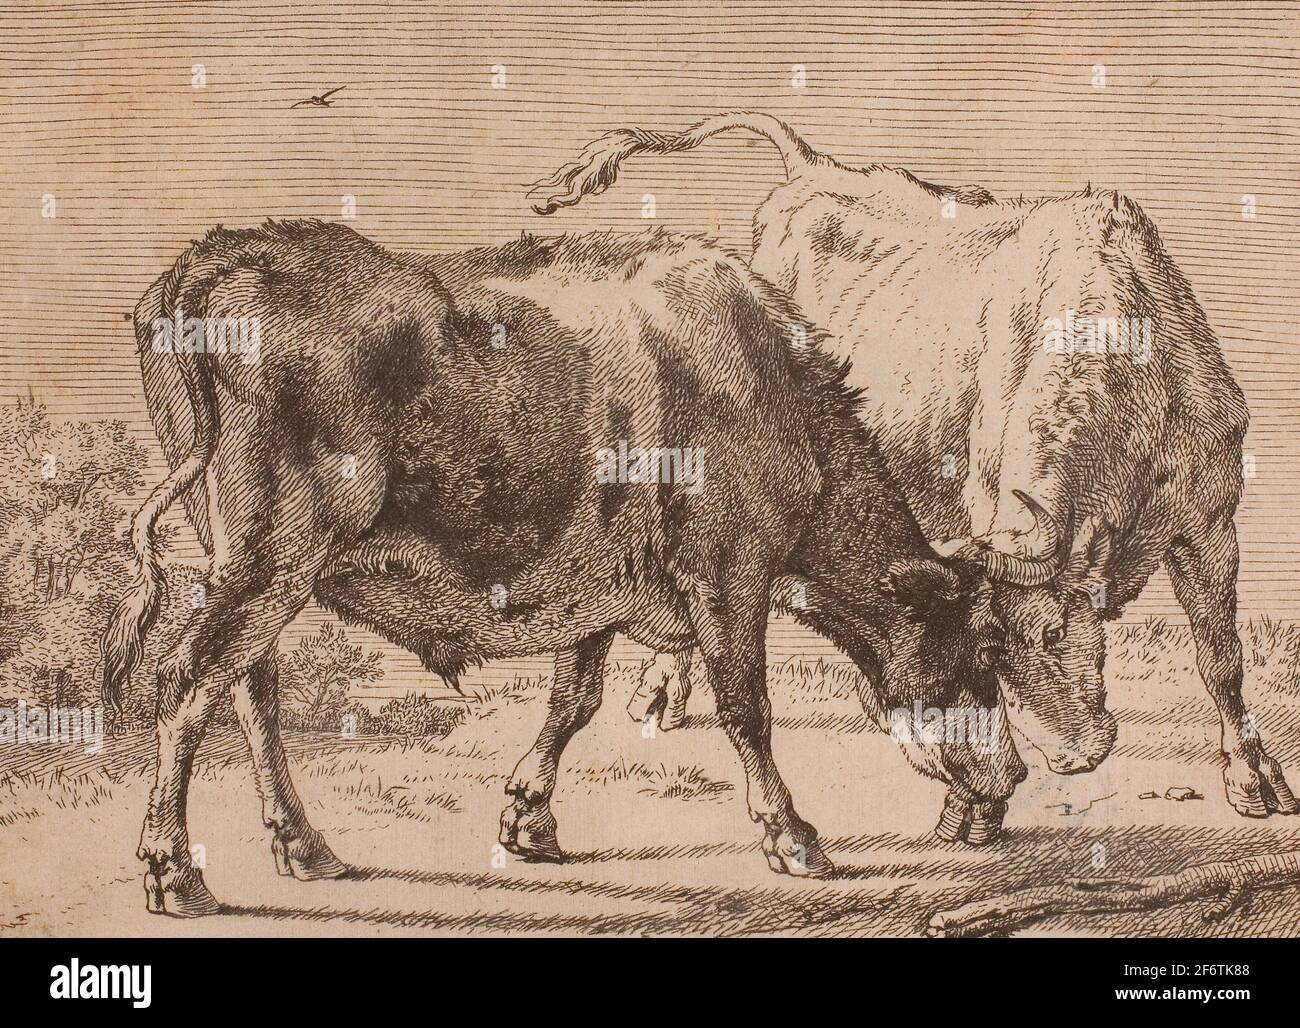 Author: Paulus Potter. Two Bulls Fighting - Paulus Potter Dutch, 1625-1654. Etching on ivory paper. 1645 - 1654. Holland. Stock Photo